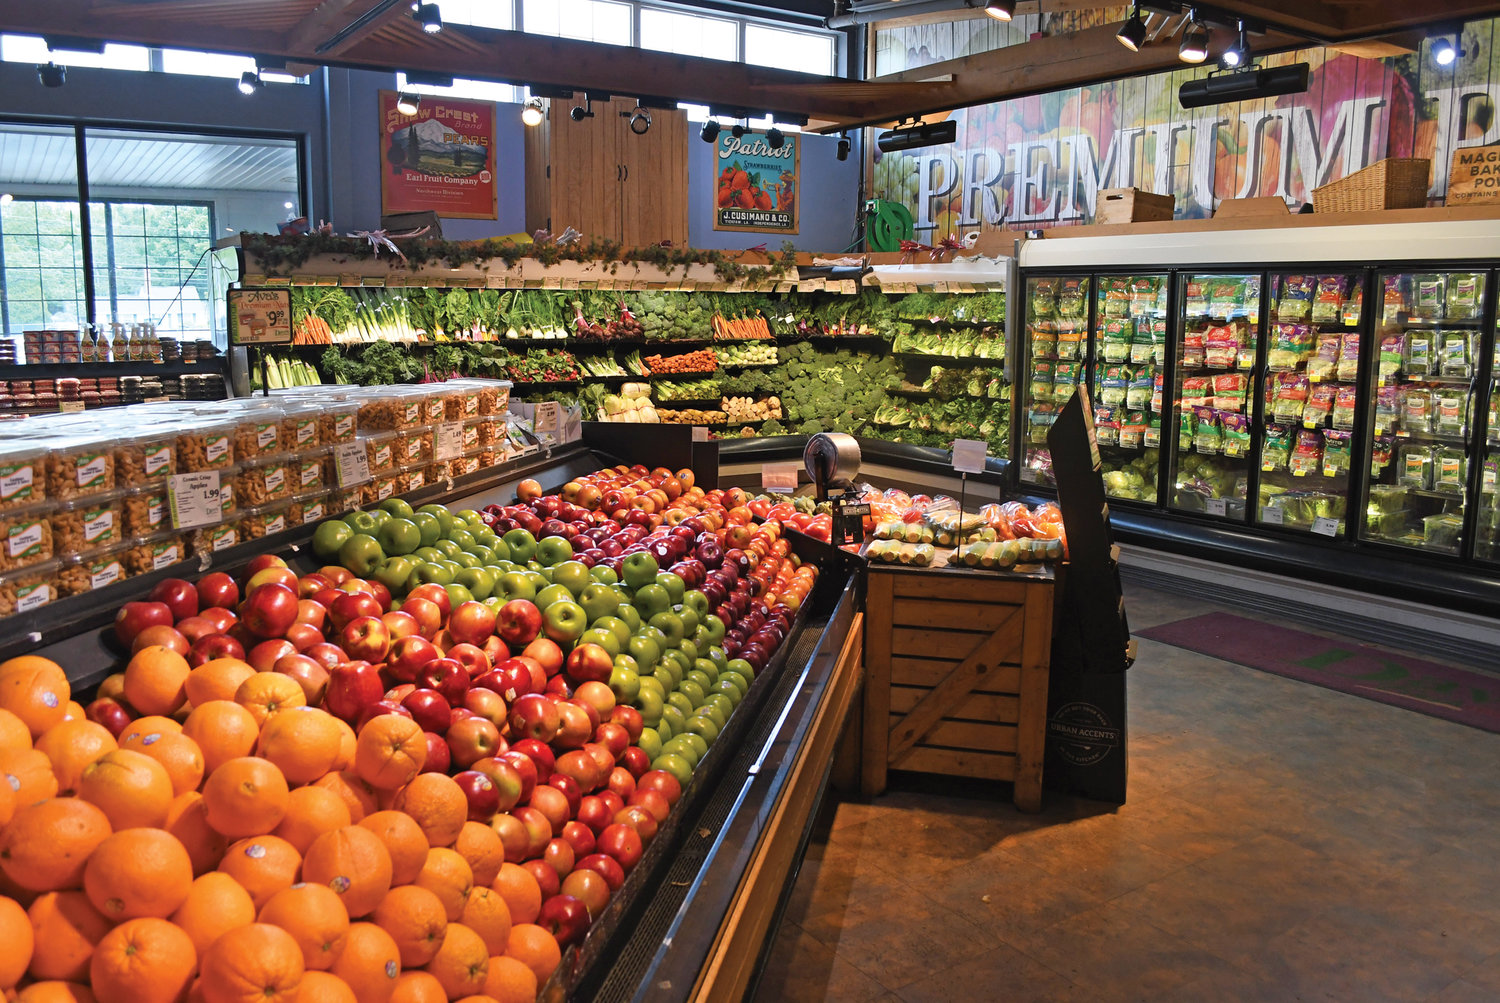 Dave’s has grown into the largest independent grocery chain in Rhode Island. Explore the fresh and delicious foods available at their 10 locations.